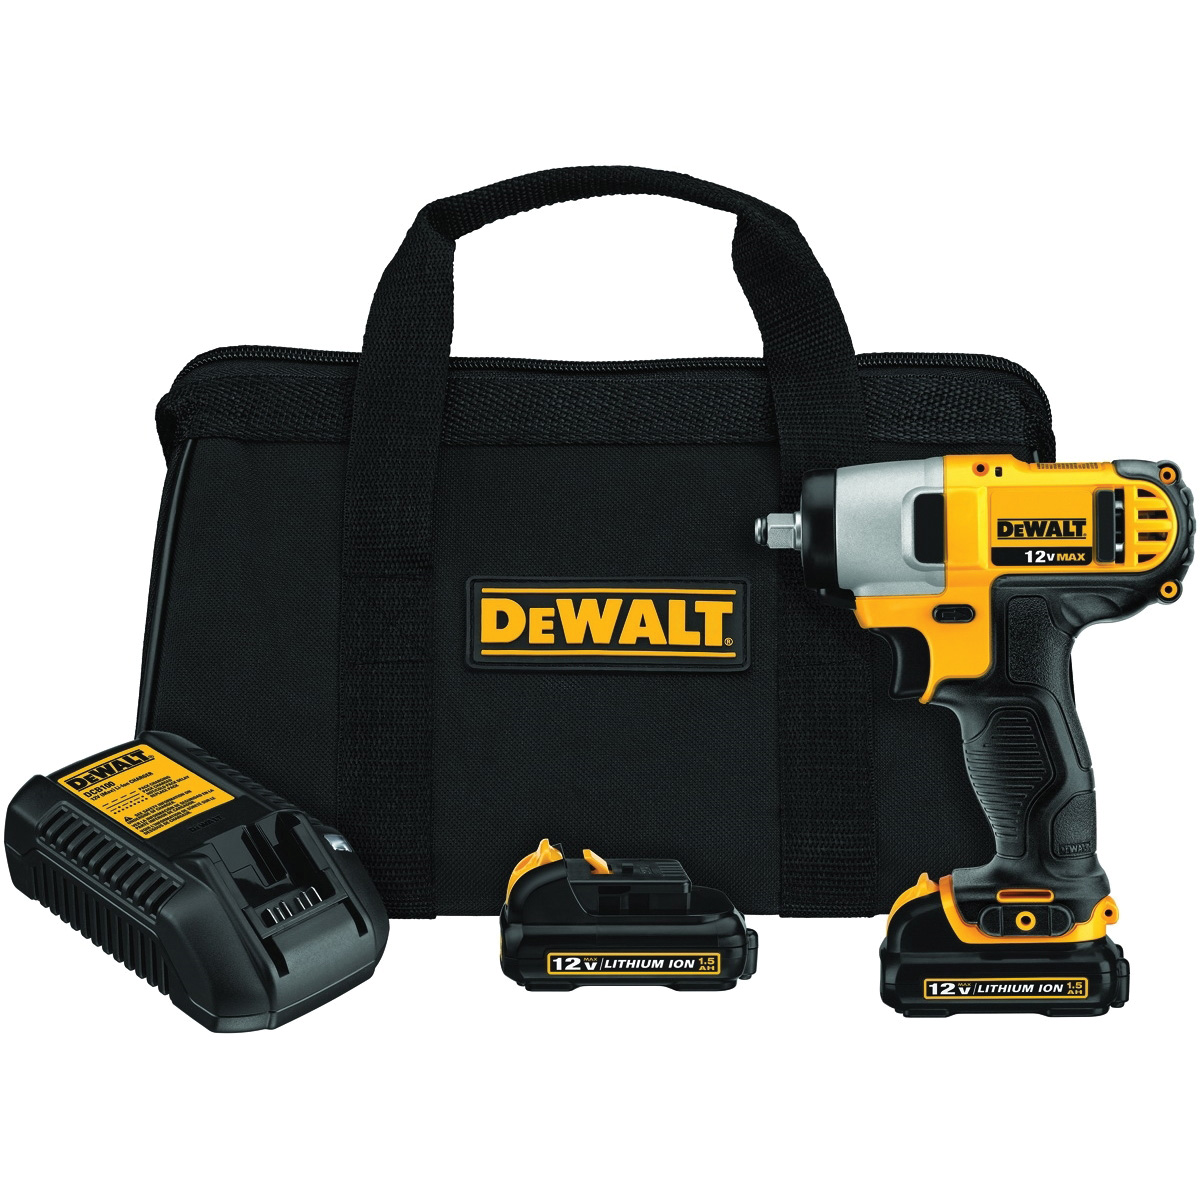 DeWALT DCF813S2 Impact Wrench Kit, Battery Included, 12 V, 1.3 Ah, 3/8 in Drive, Square Drive, 0 to 3400 ipm - 5